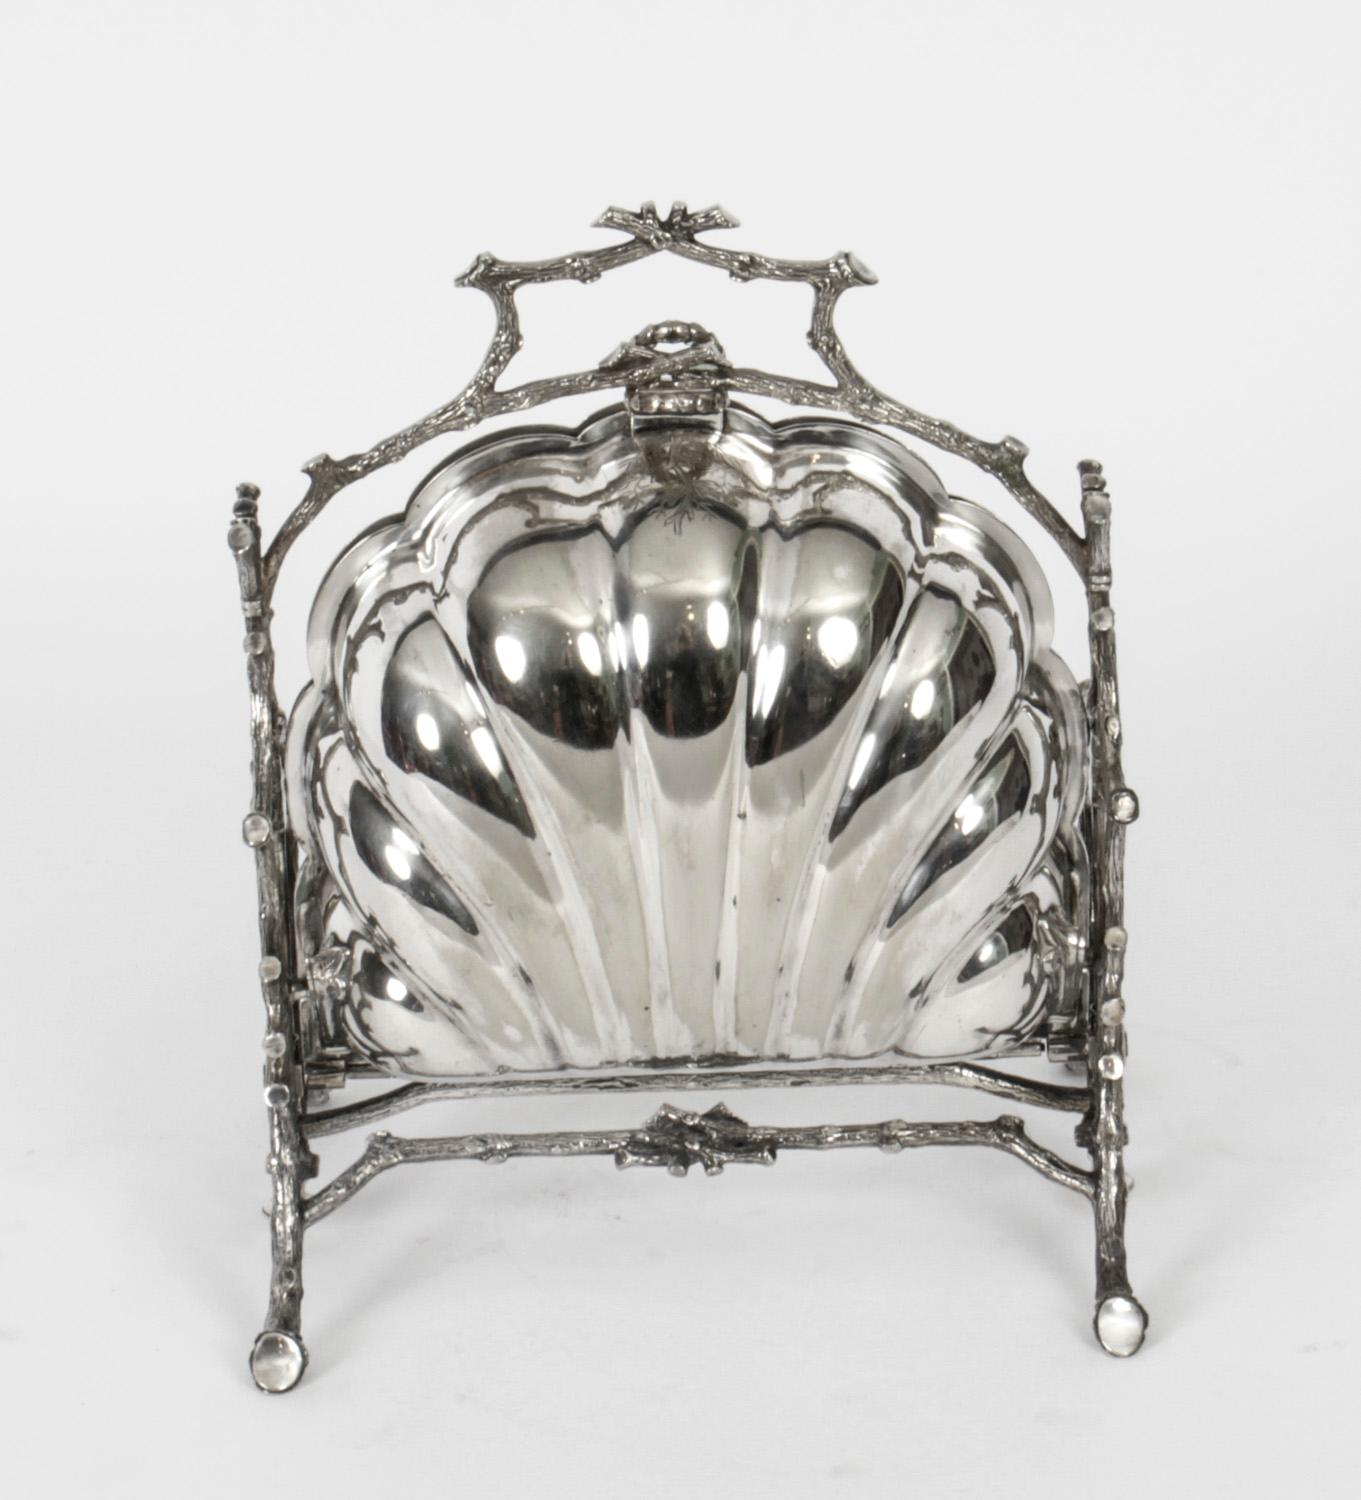 Antique Victorian Silver Plated Biscuit Box, 19th Century In Good Condition For Sale In London, GB